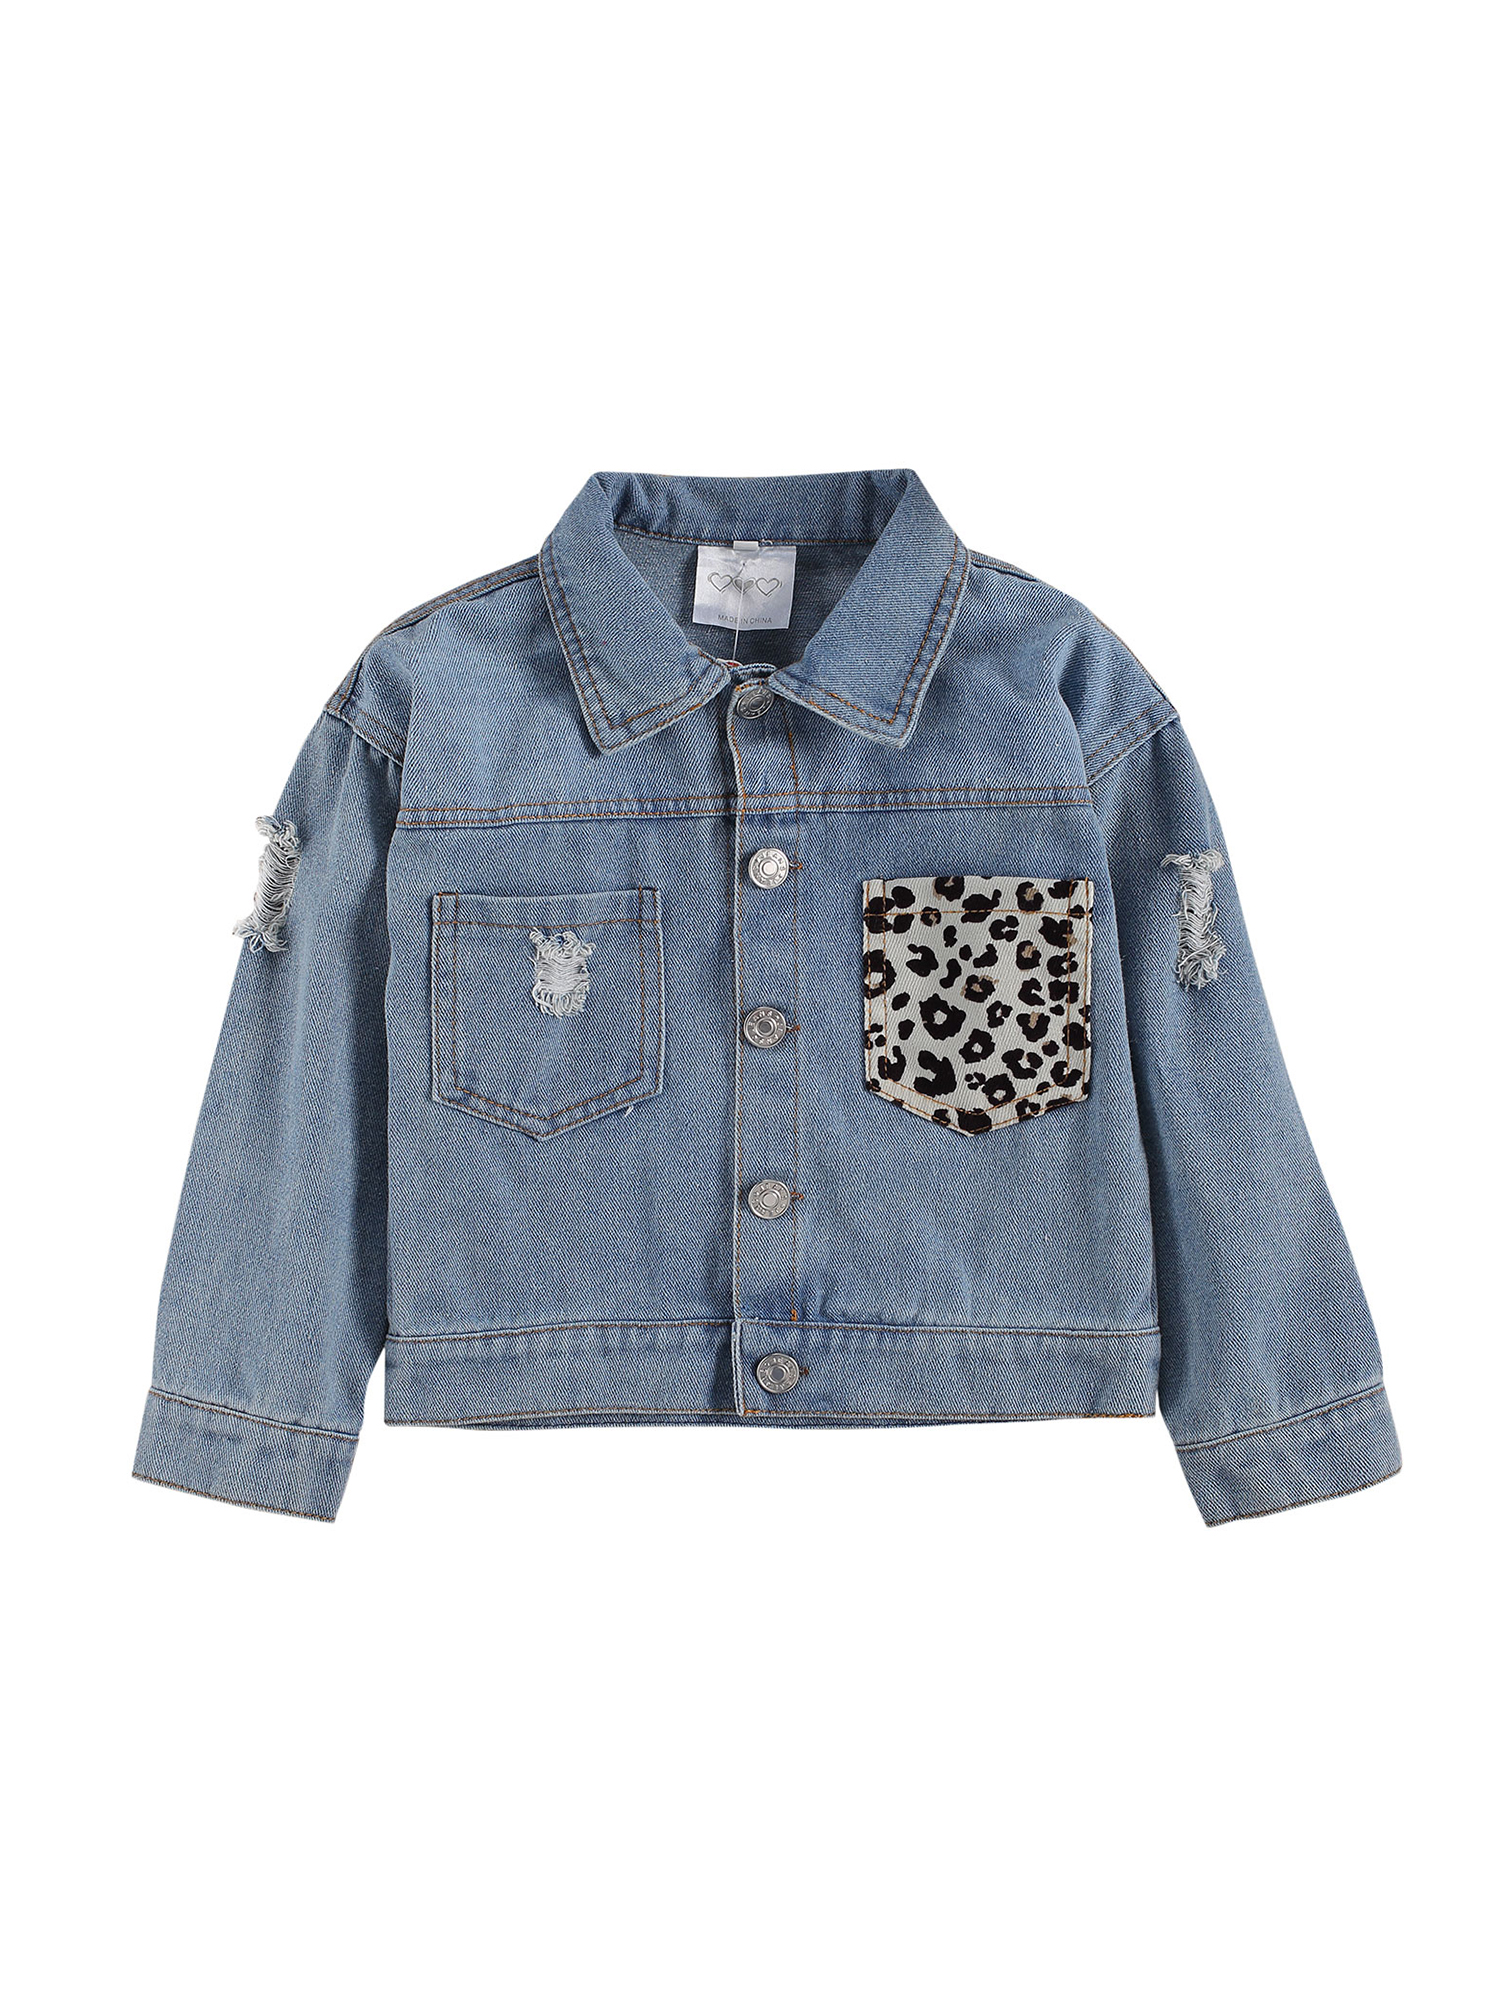 Toddler Baby Girl Coat Long Sleeve Denim Jacket Sequin Pockets Ripped Jean Jacket Outwear 1-6T - image 2 of 9